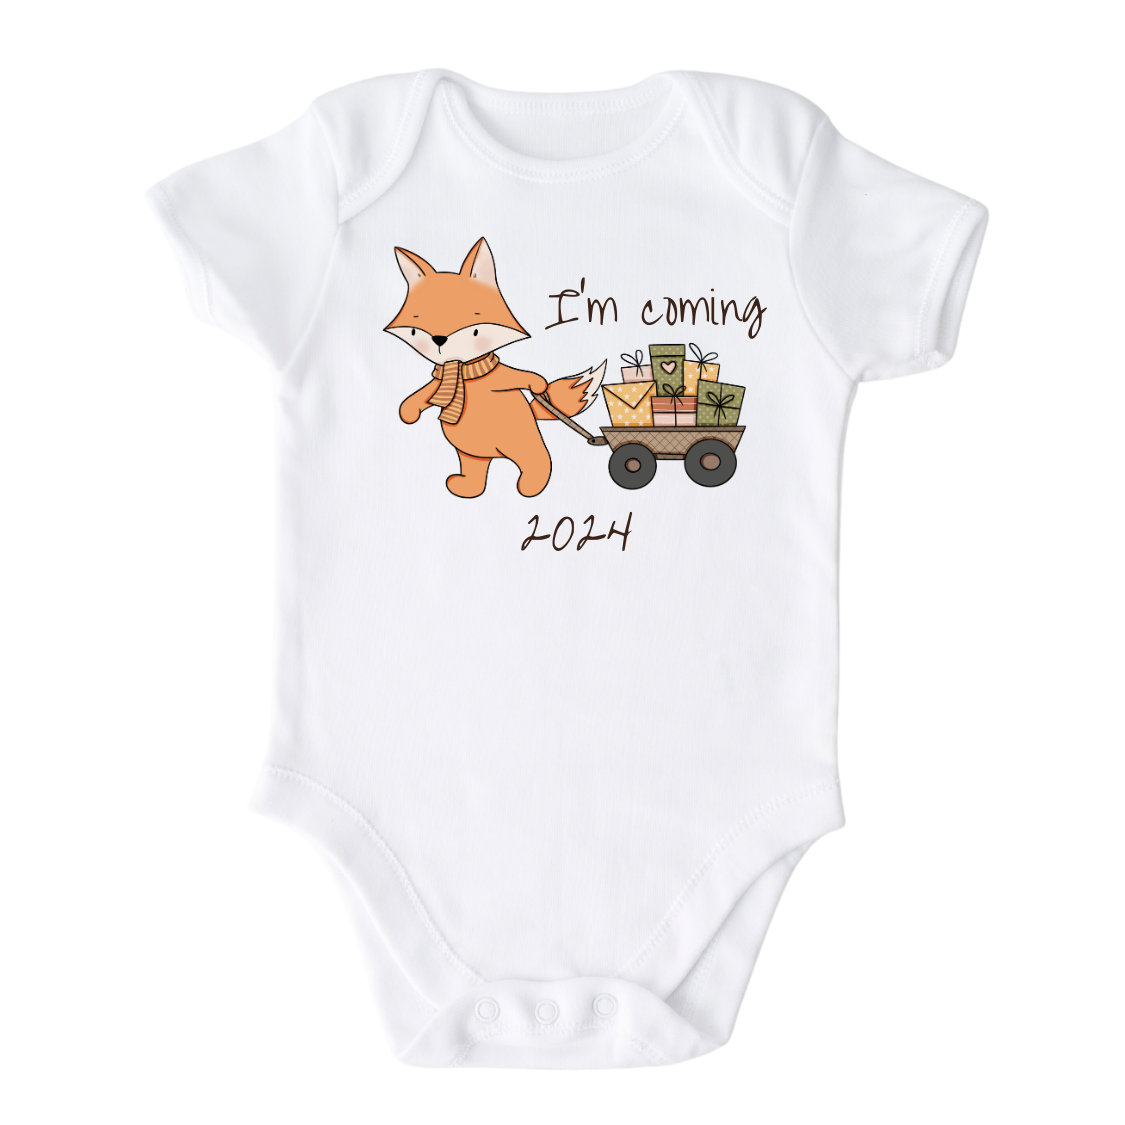 Kid's t-shirt and baby onesie with cute fox pulling a wagon design, customizable with names for a special touch.